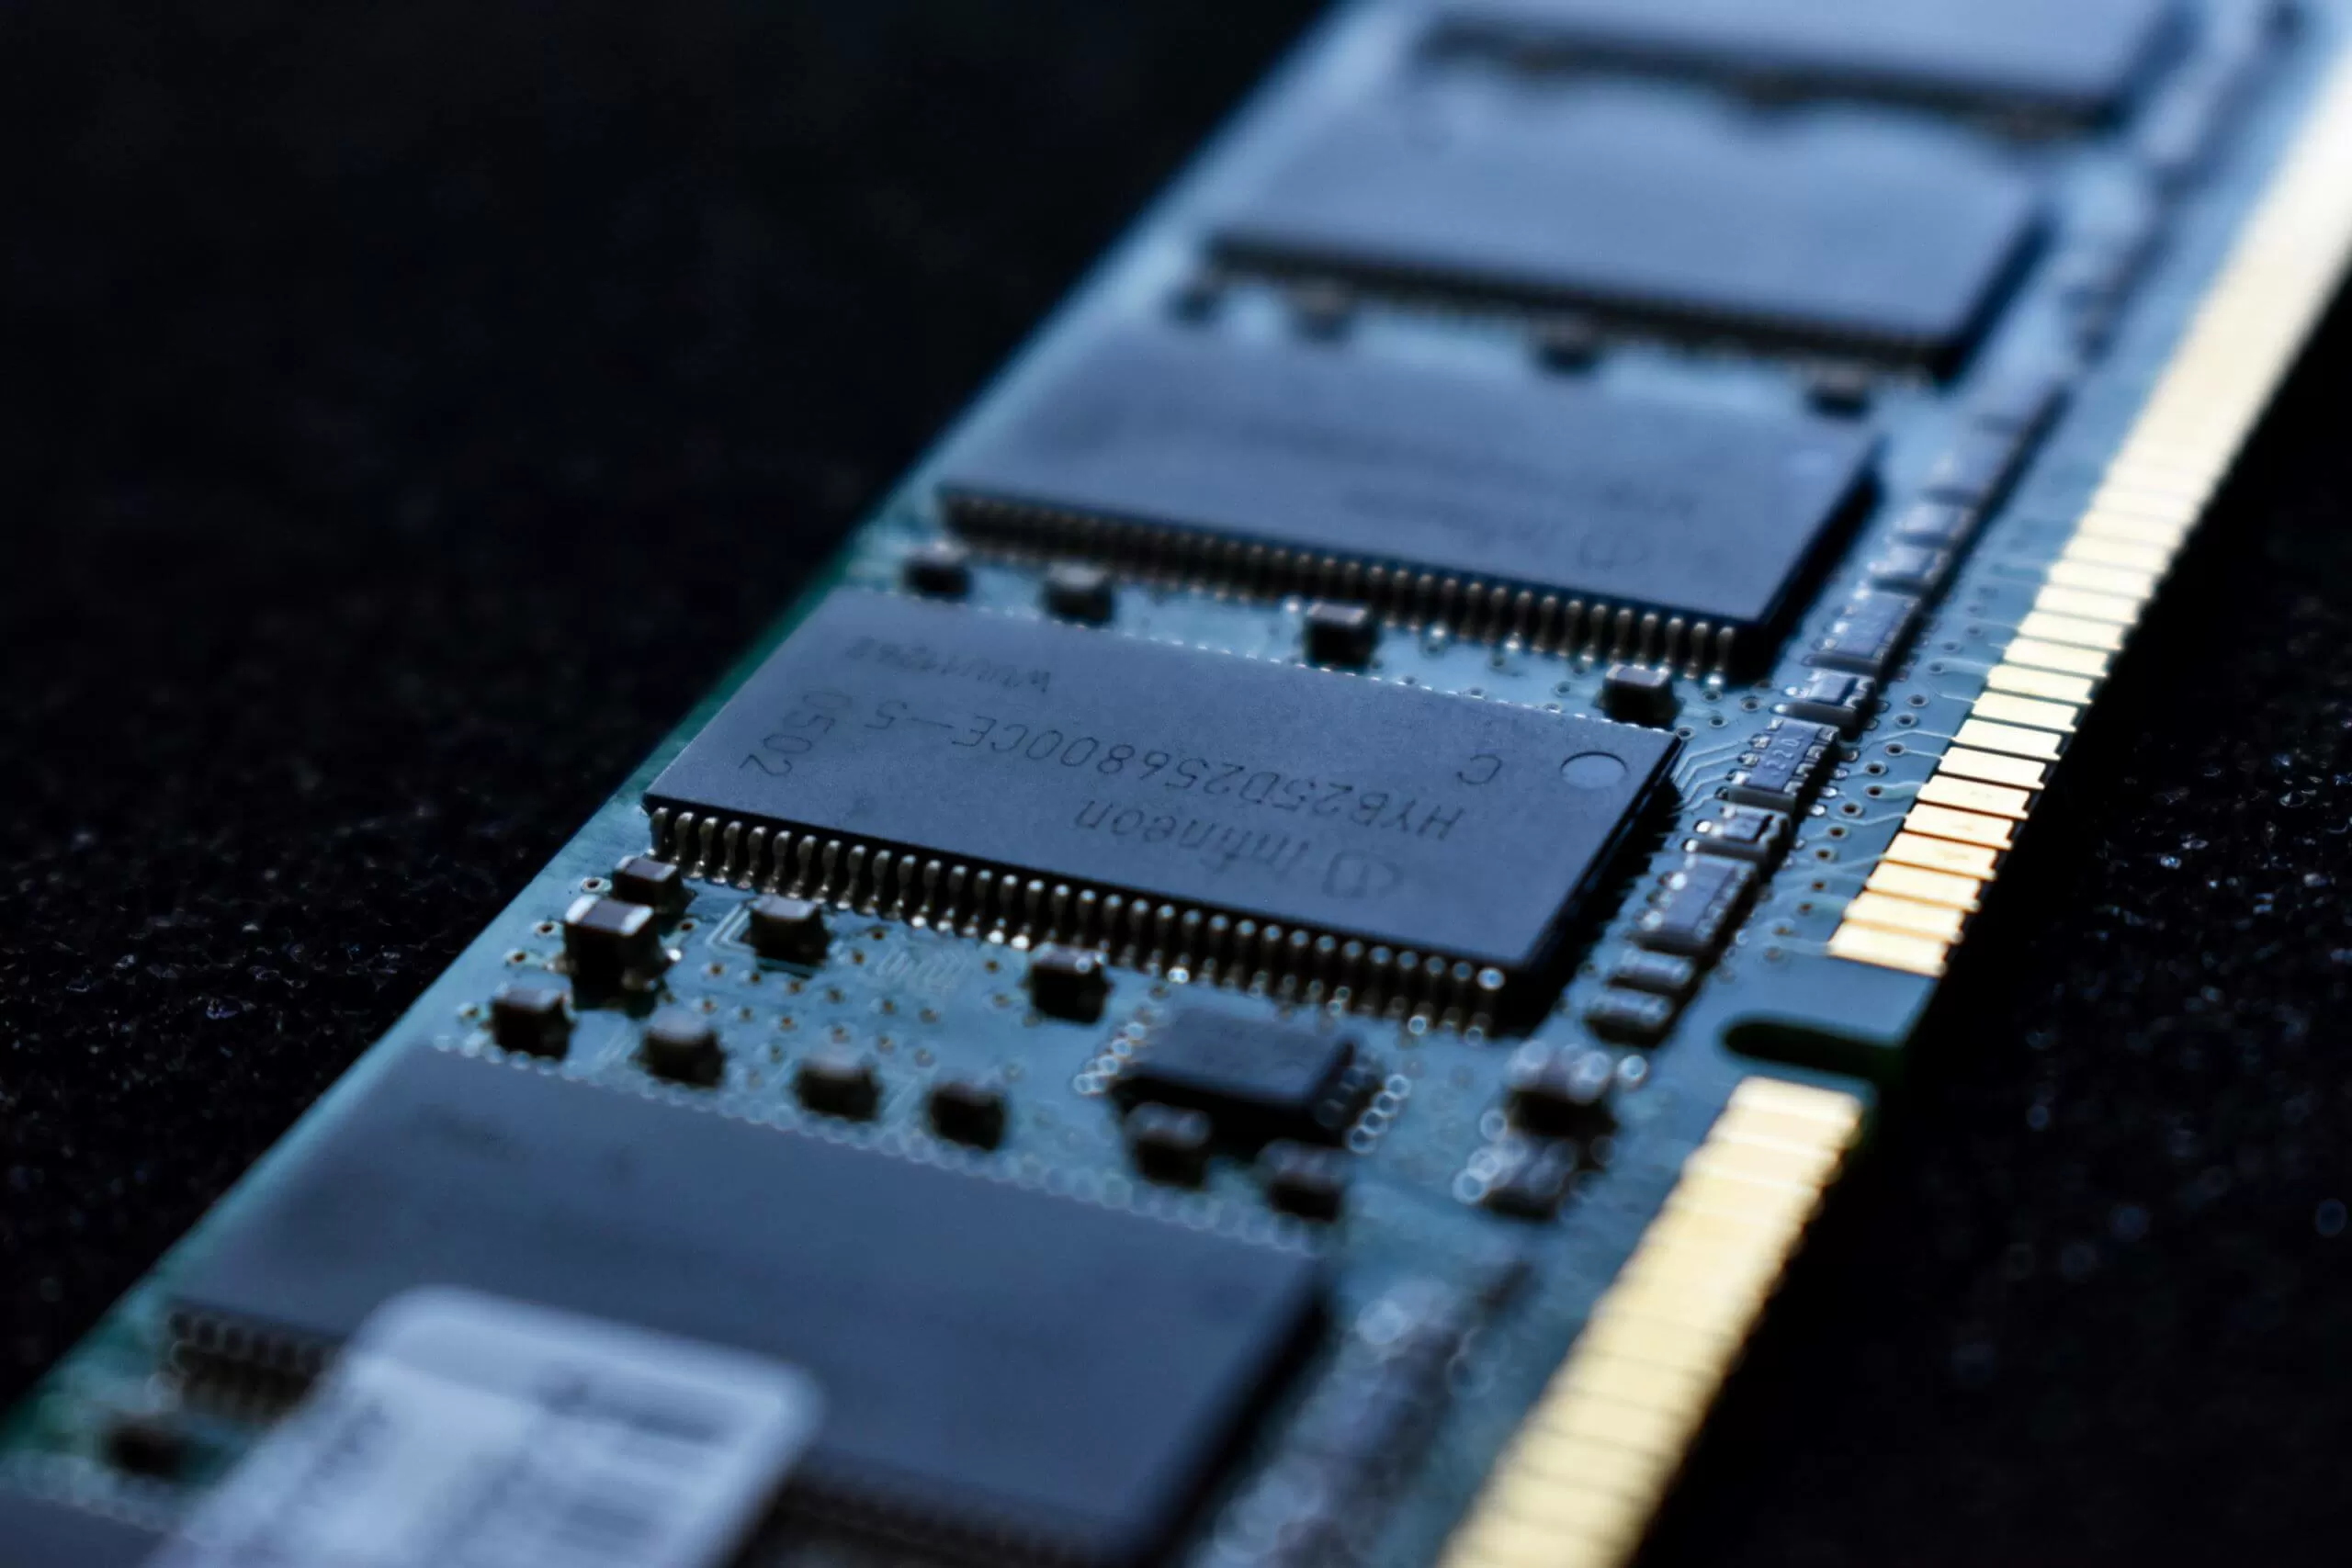 Internal AMD roadmap shows DDR5 and native USB 4.0 support arriving in 2022